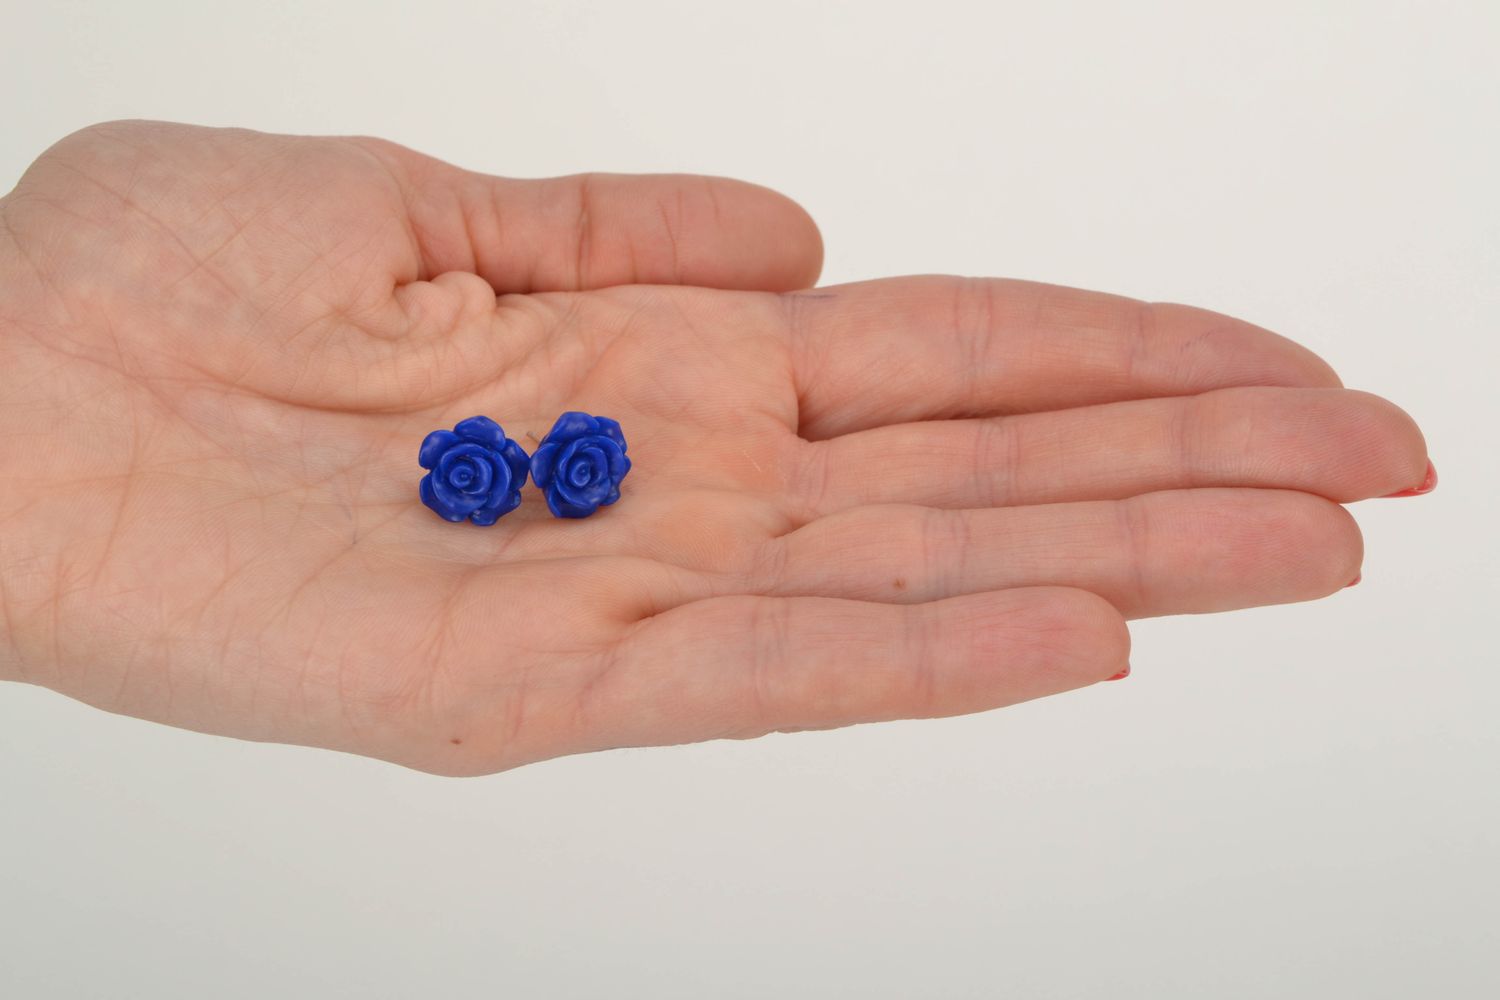 Polymer clay stud earrings Blue Roses photo 2